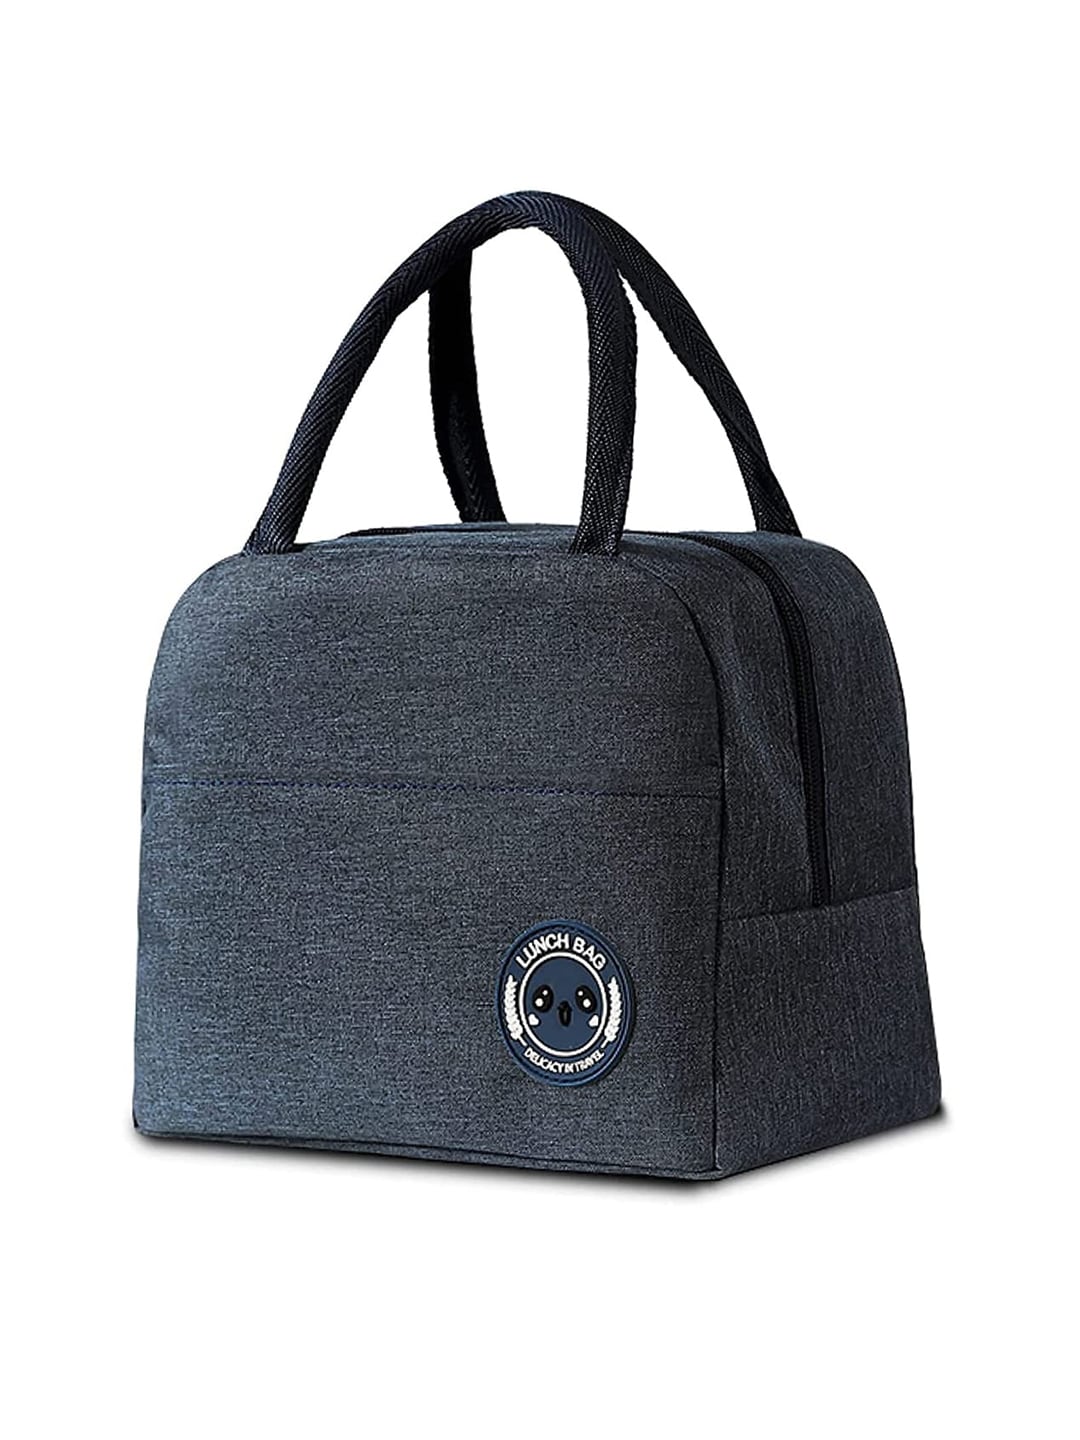 HOUSE OF QUIRK Navy Blue Insulated Lunch Bag Price in India